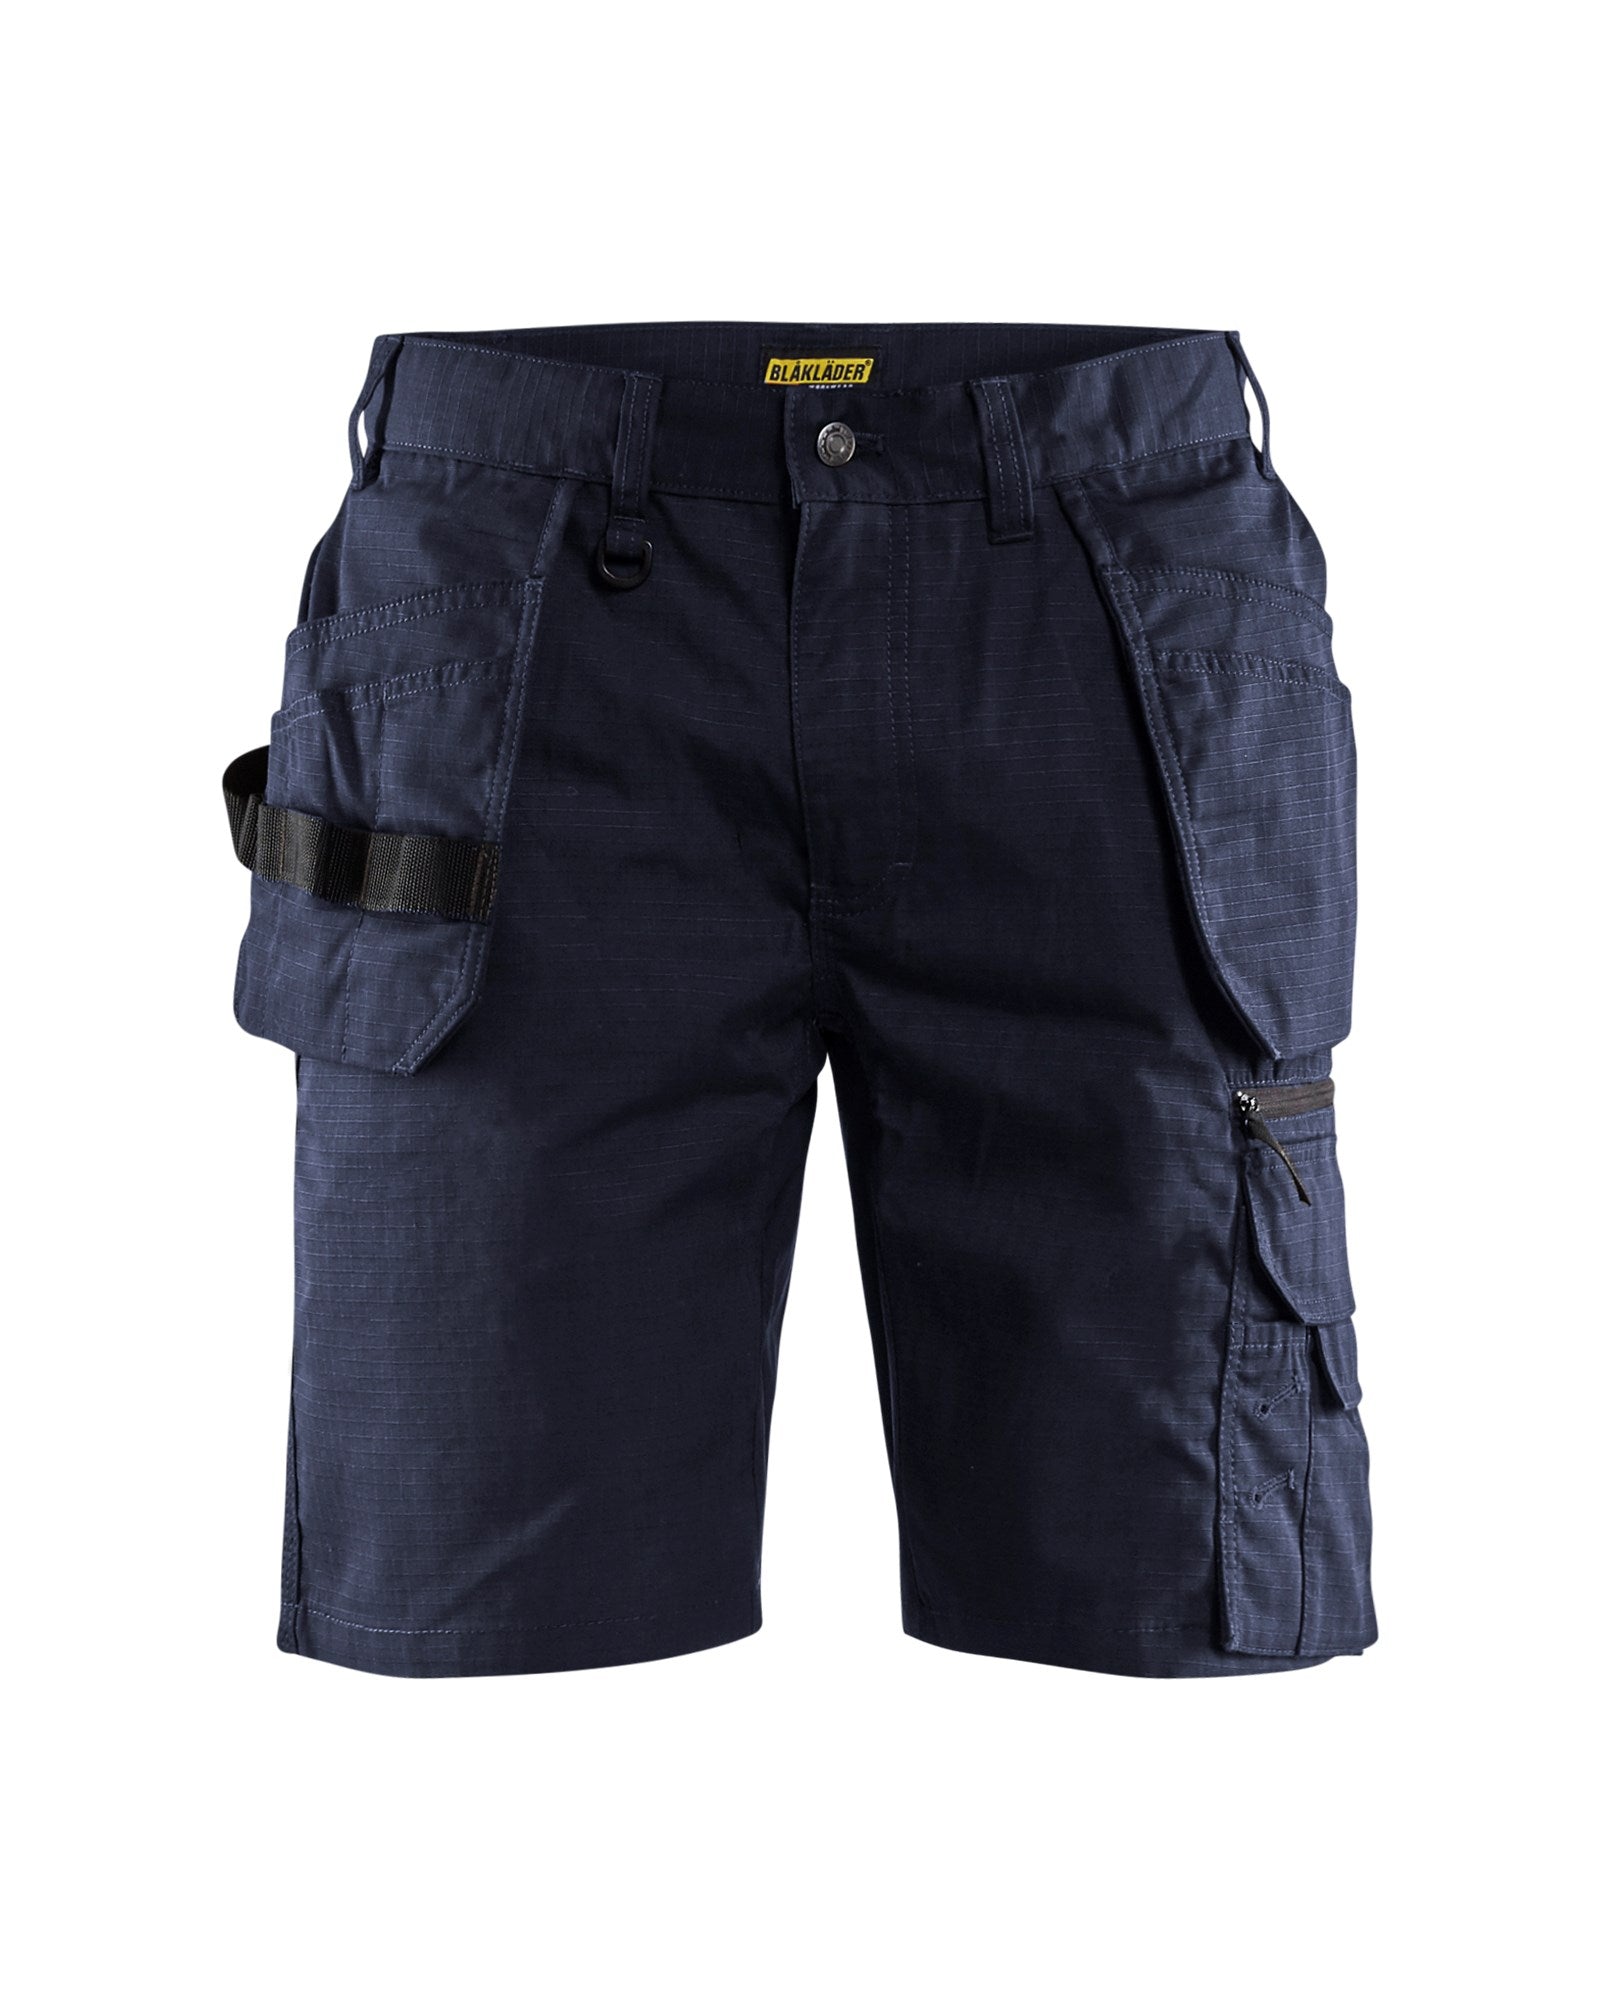 Men's Blaklader US Ripstop with Utility Pockets Short in Navy blue Craftsmen from the front view